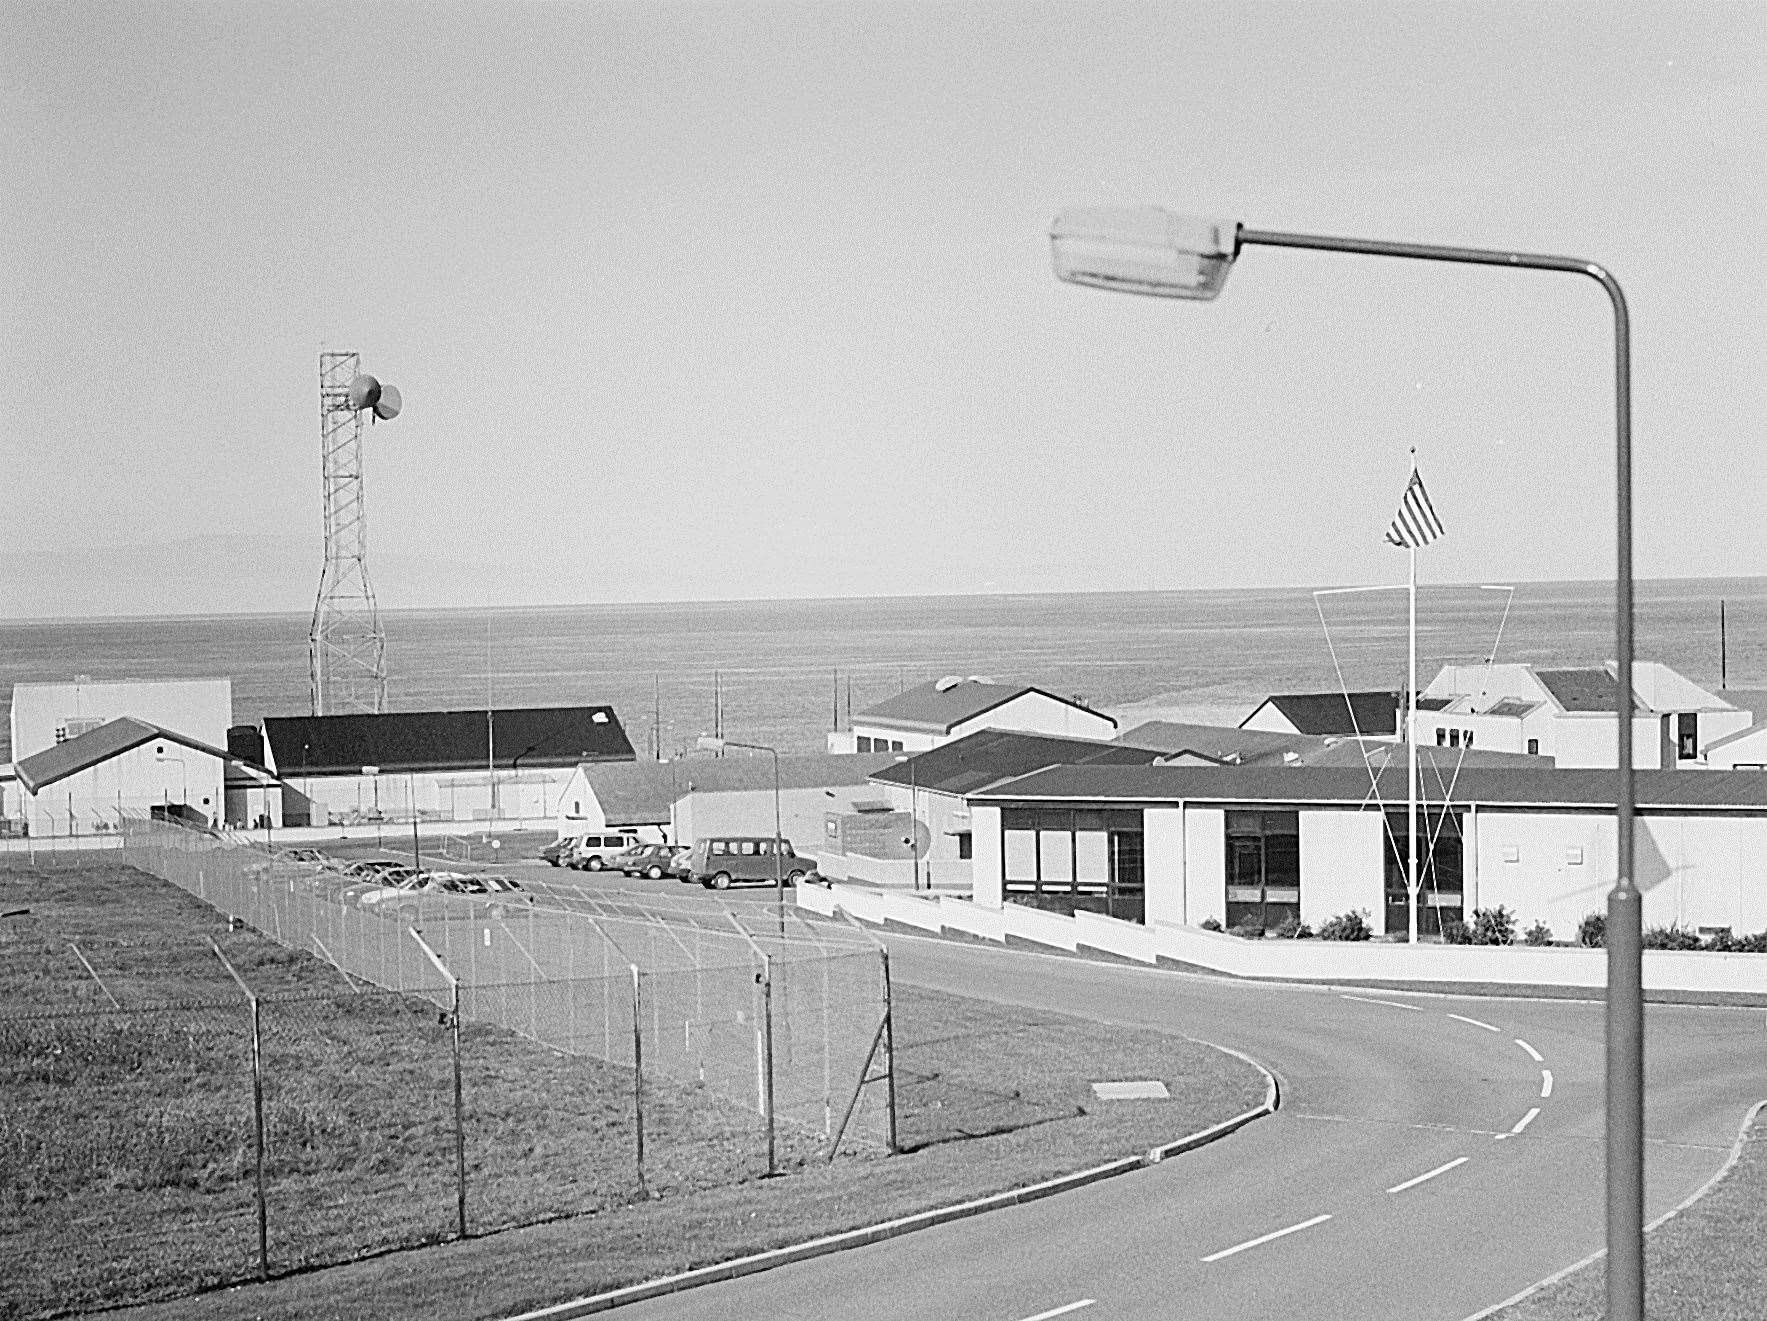 The Forss base at the time when US Navy personnel were stationed there.